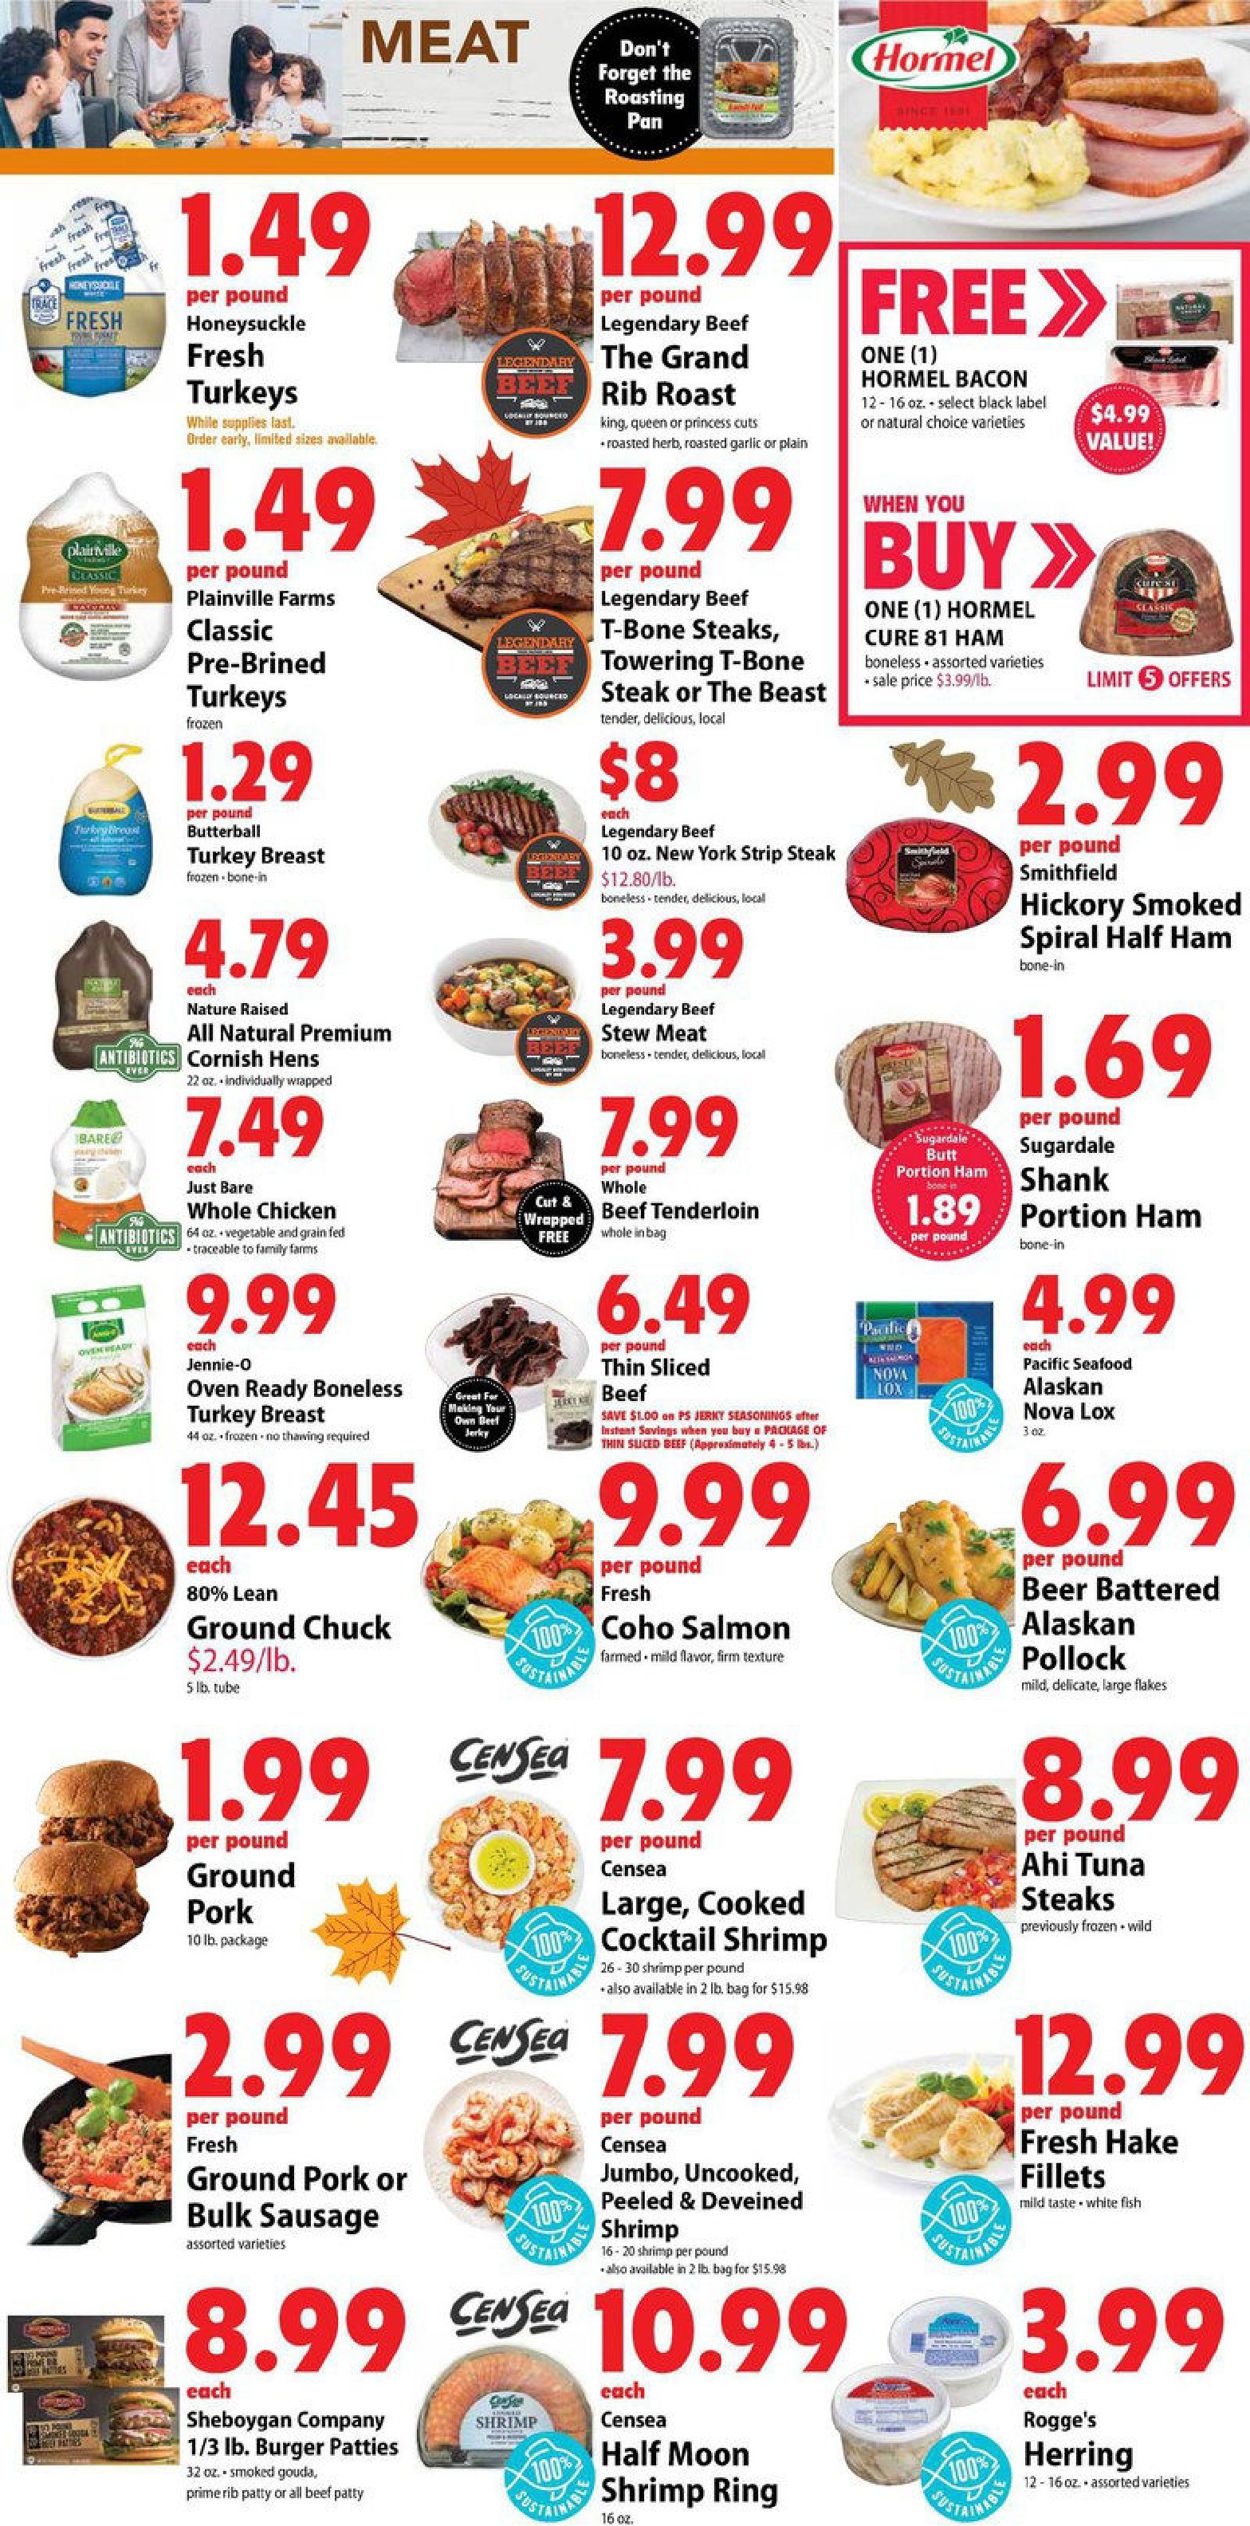 Festival Foods Current weekly ad 11/20 11/26/2019 [3]